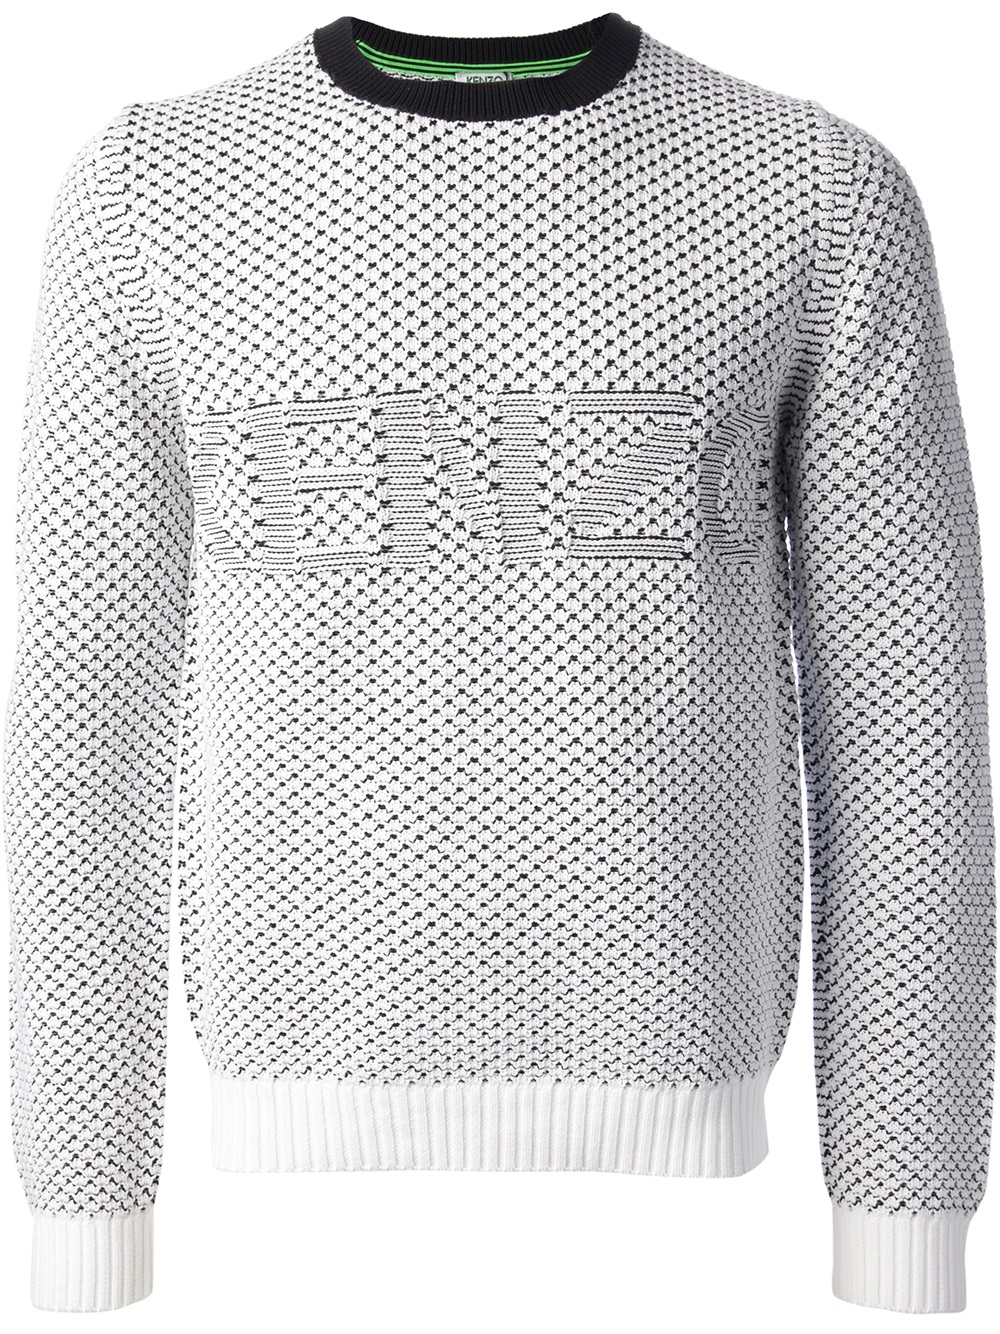 Lyst - Kenzo Wave Knit Sweater in White for Men